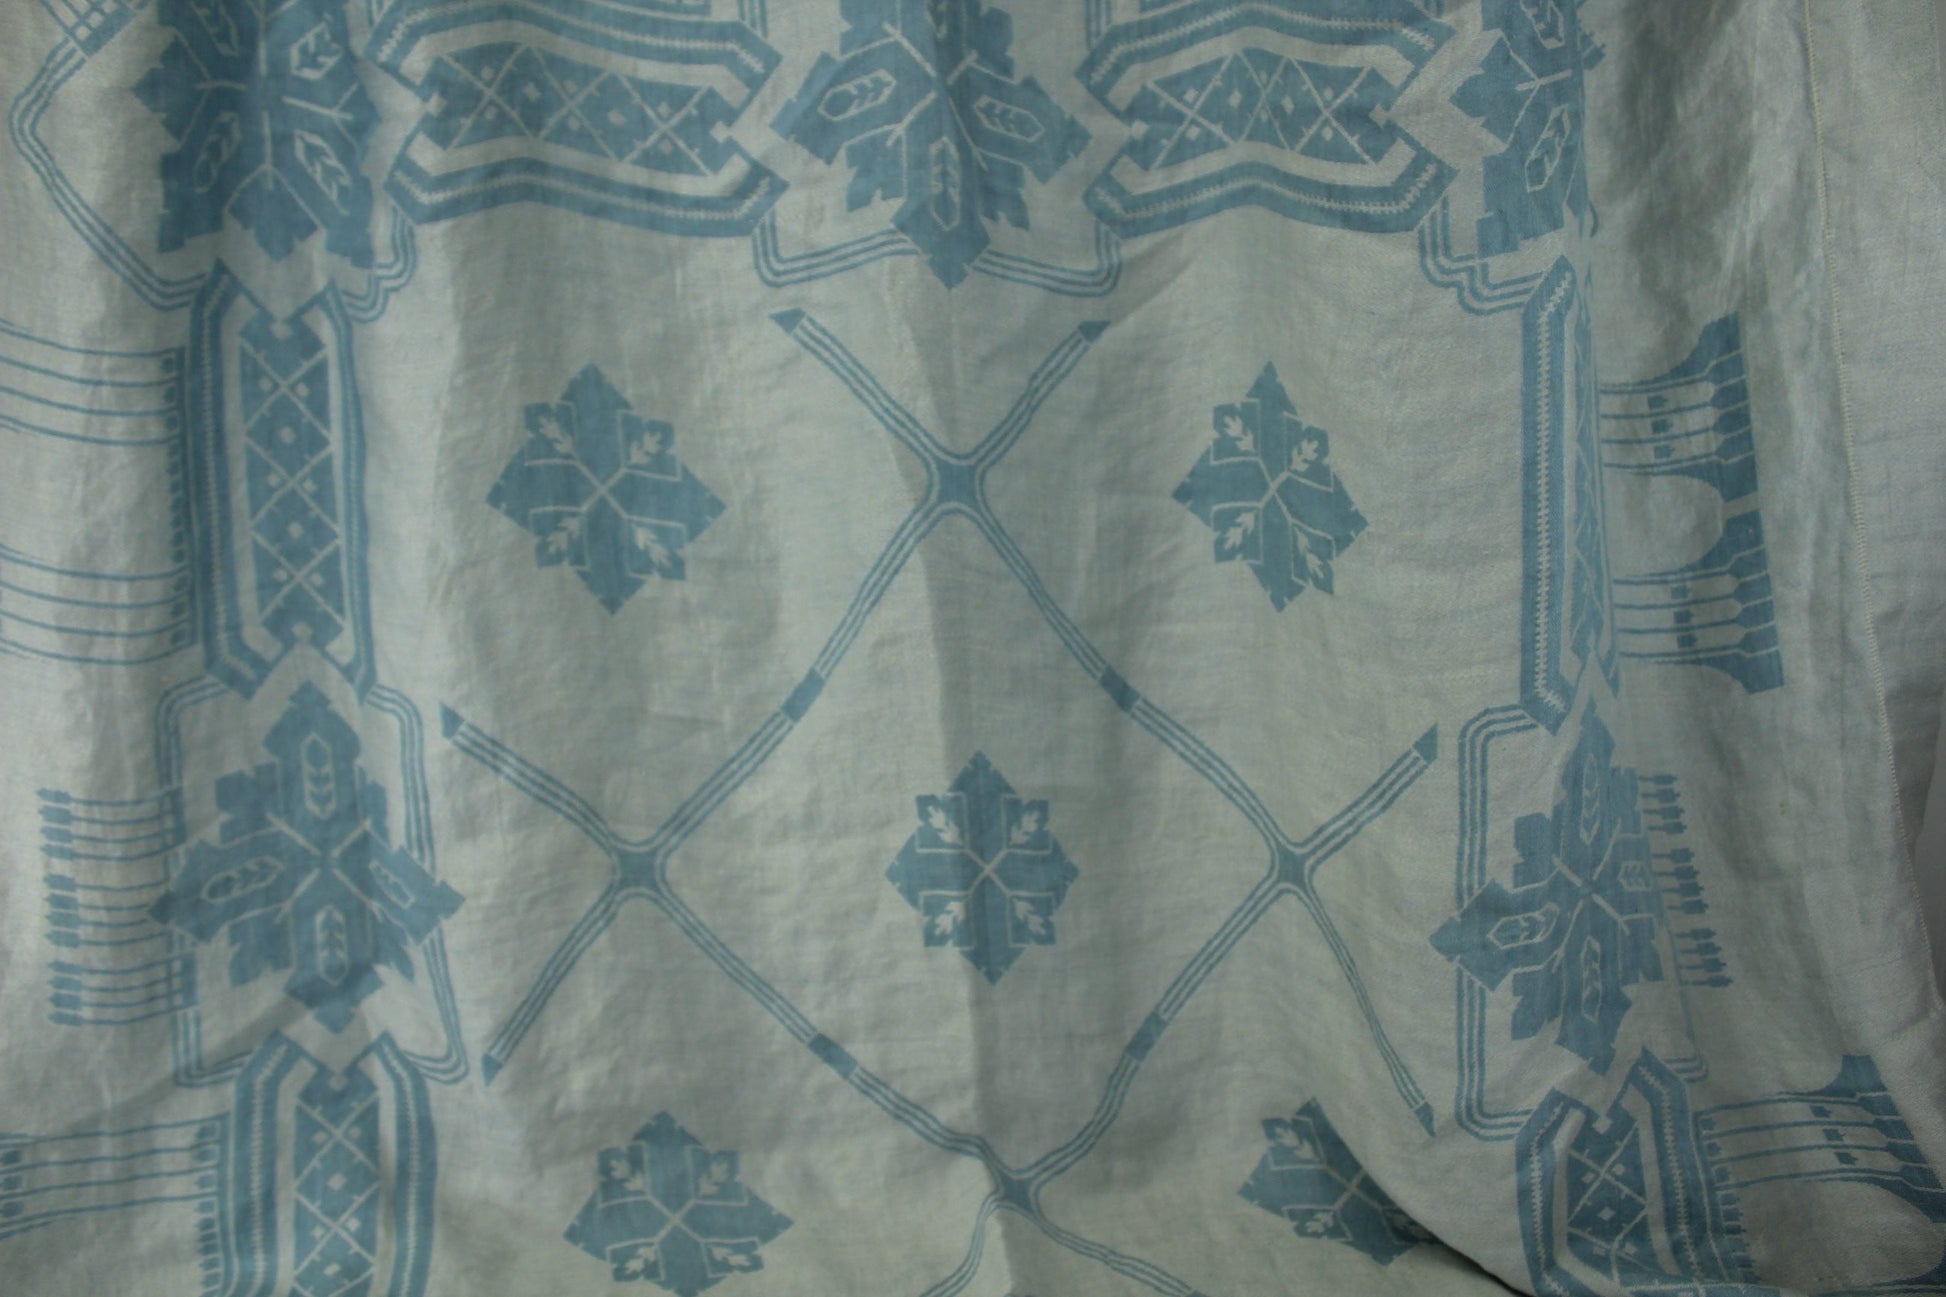 Blue Woven Tablecloth - 6 Matching Napkins - Fantastic Vintage Fabric classic beauty